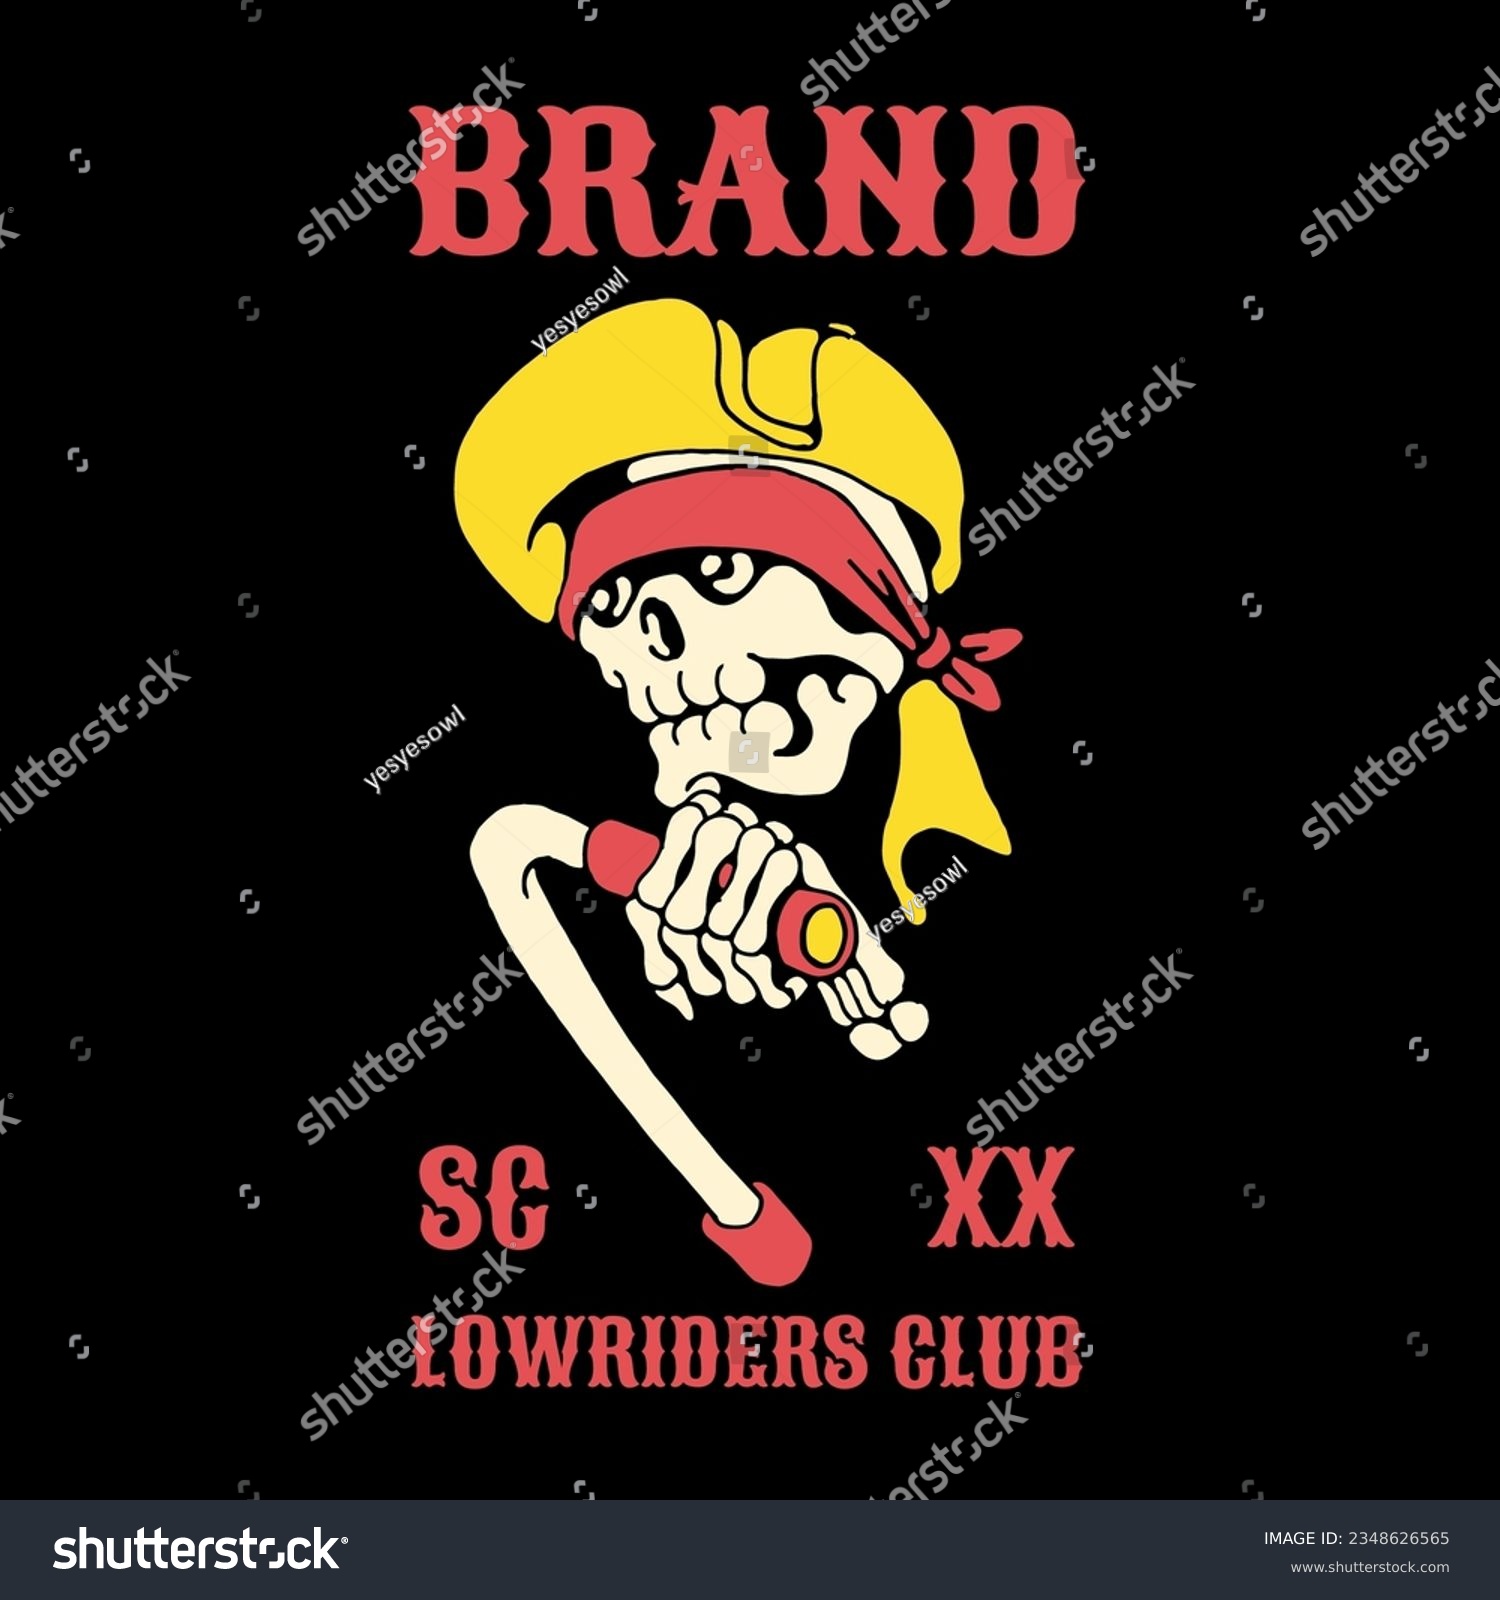 SVG of Skeleton drawing design riding a lowrider bike. highly recommended for t-shirt designs, posters and the like. svg